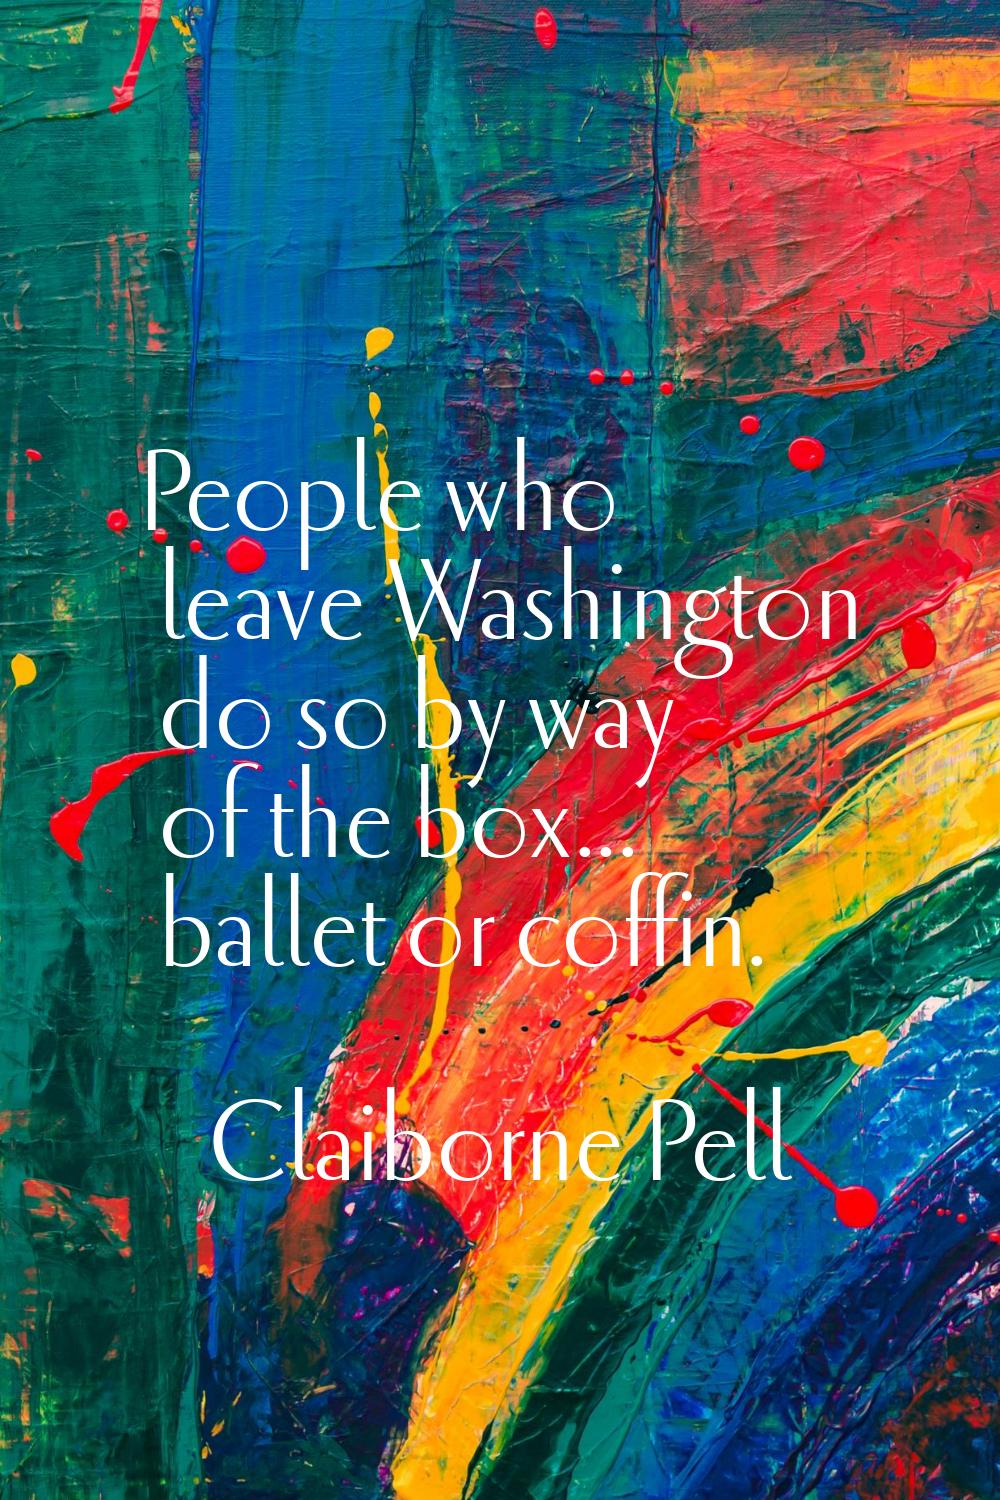 People who leave Washington do so by way of the box... ballet or coffin.